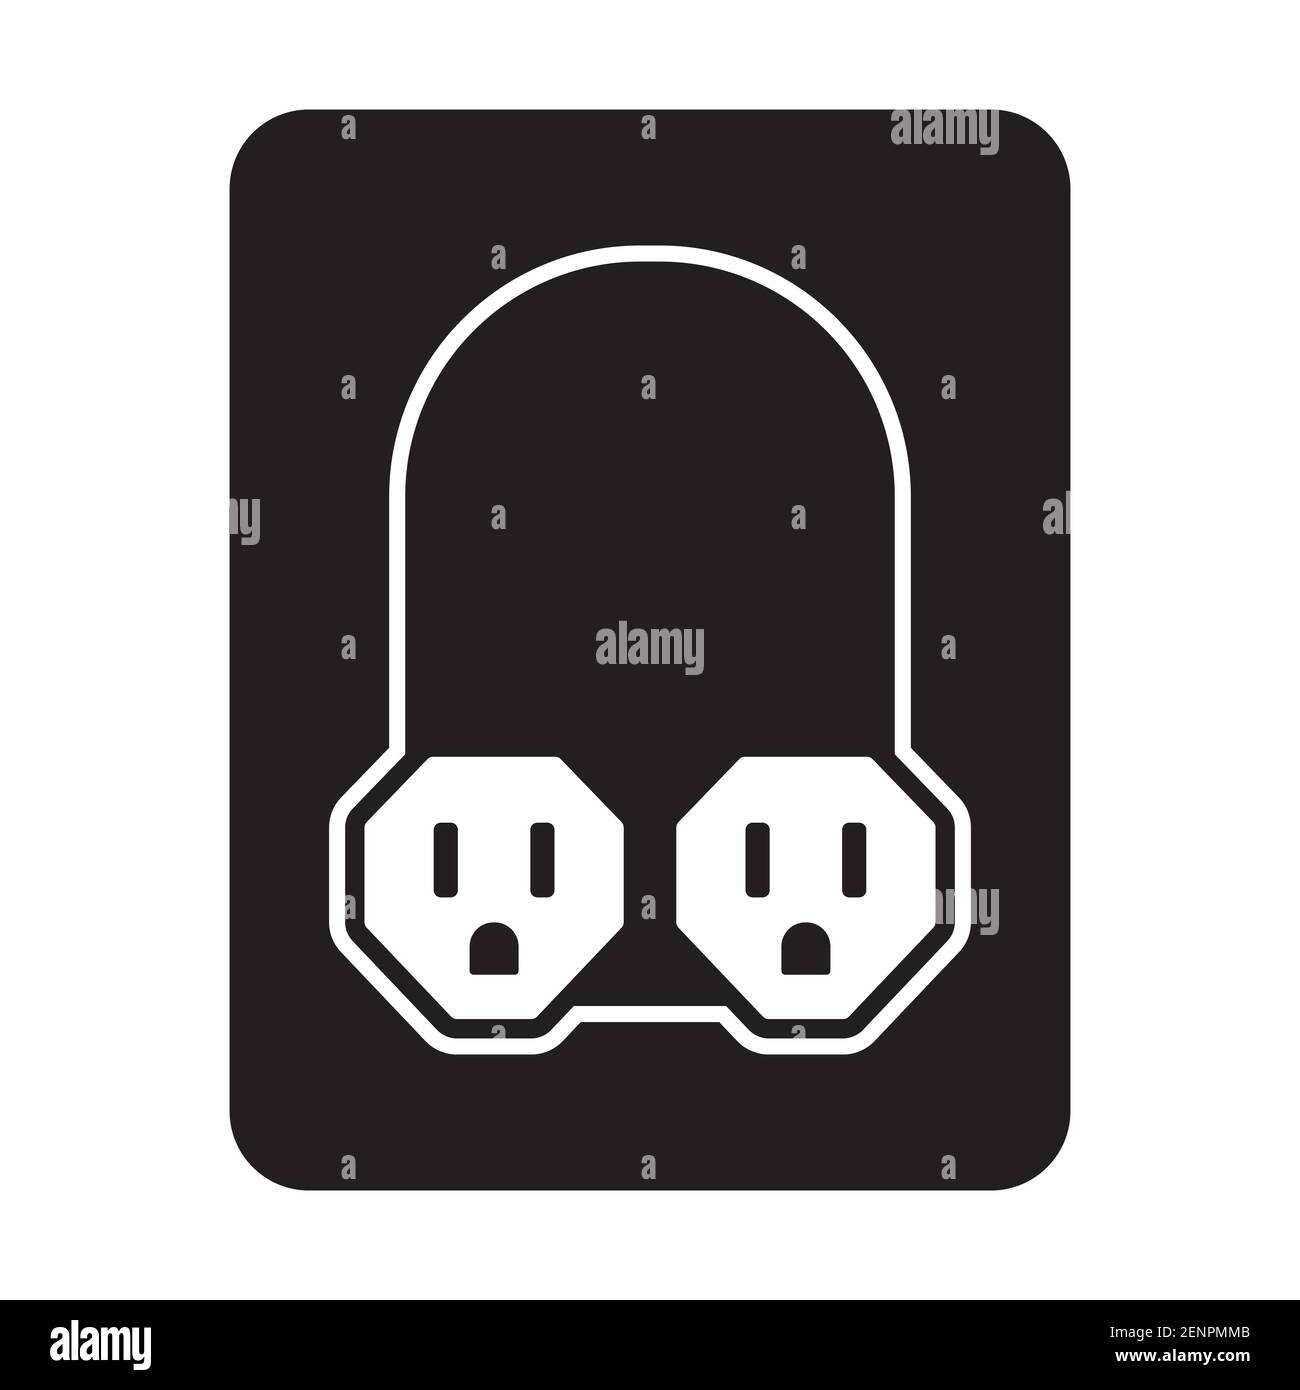 Nema 5-15 connector power outlet flat icon for apps or websites Stock Vector